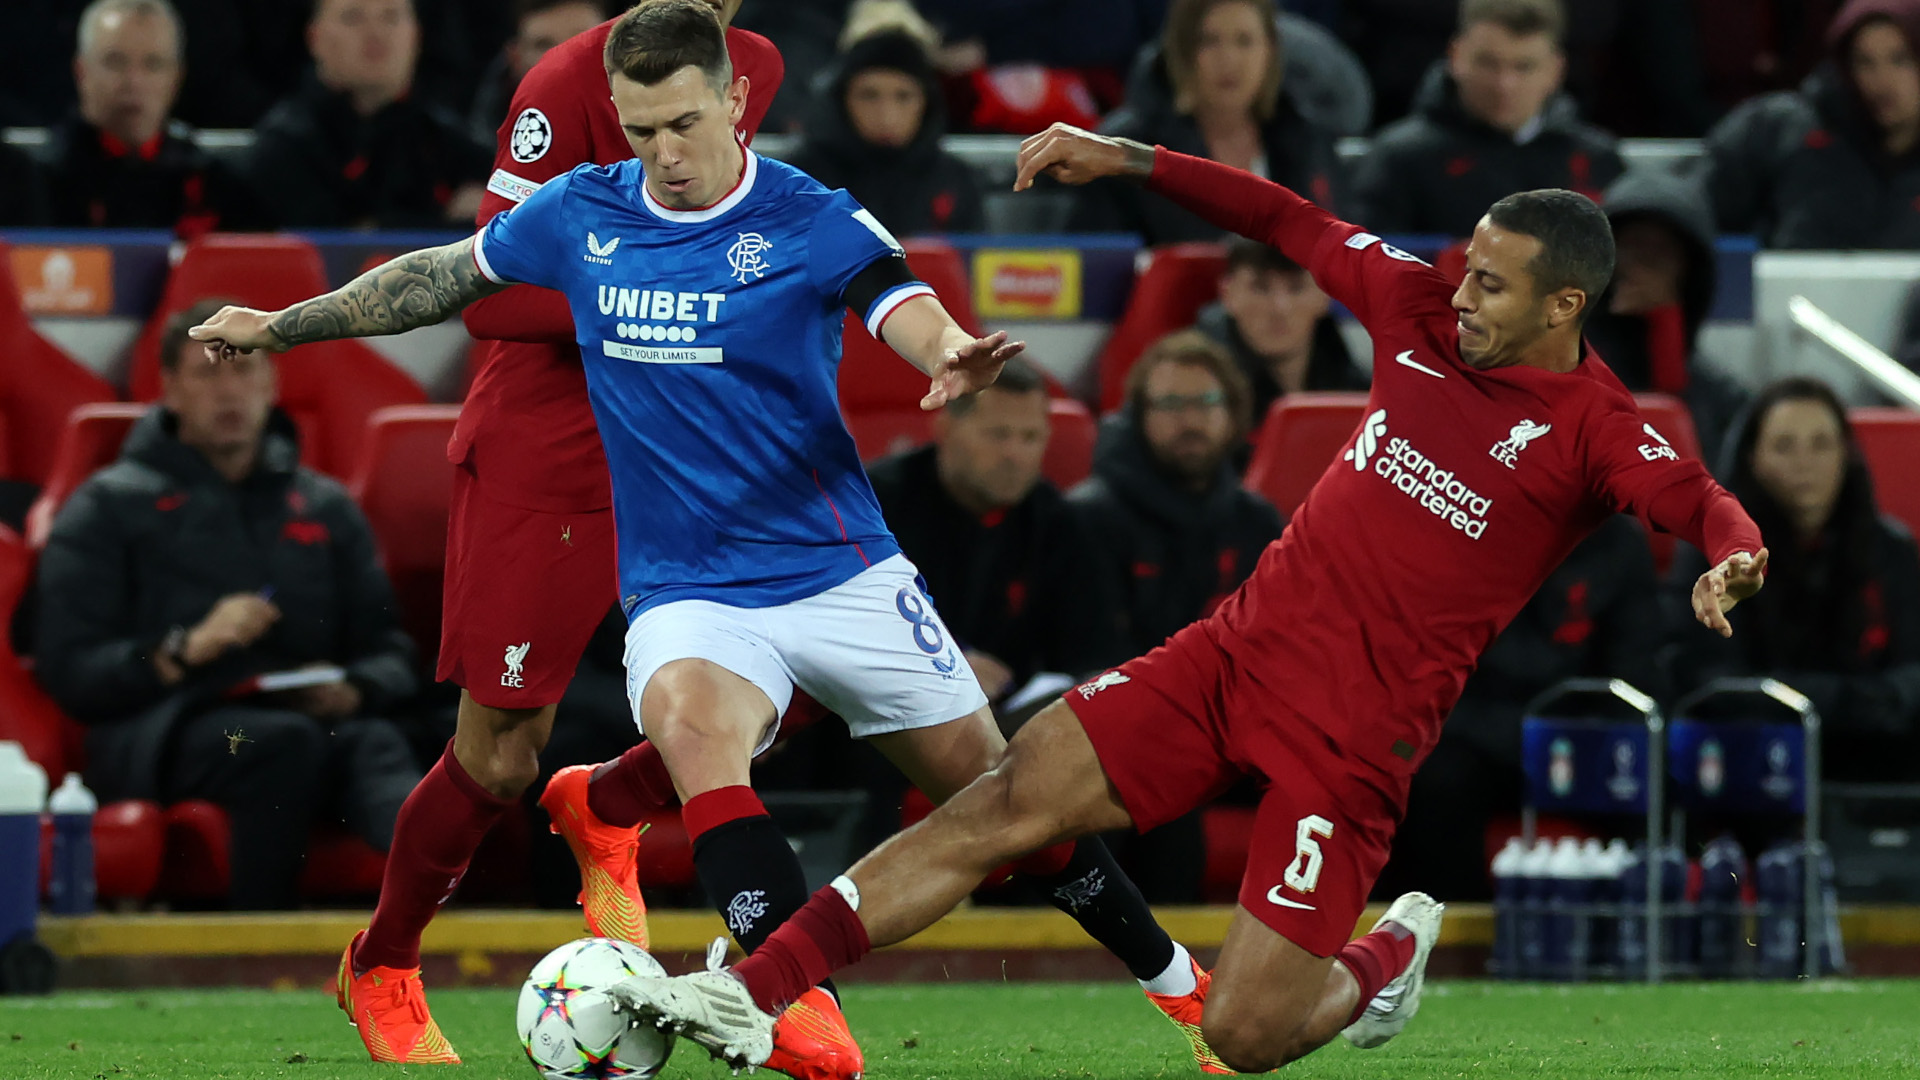 Rangers vs Liverpool live stream how to watch Champions League online and on TV anywhere, team news, Salah benched TechRadar